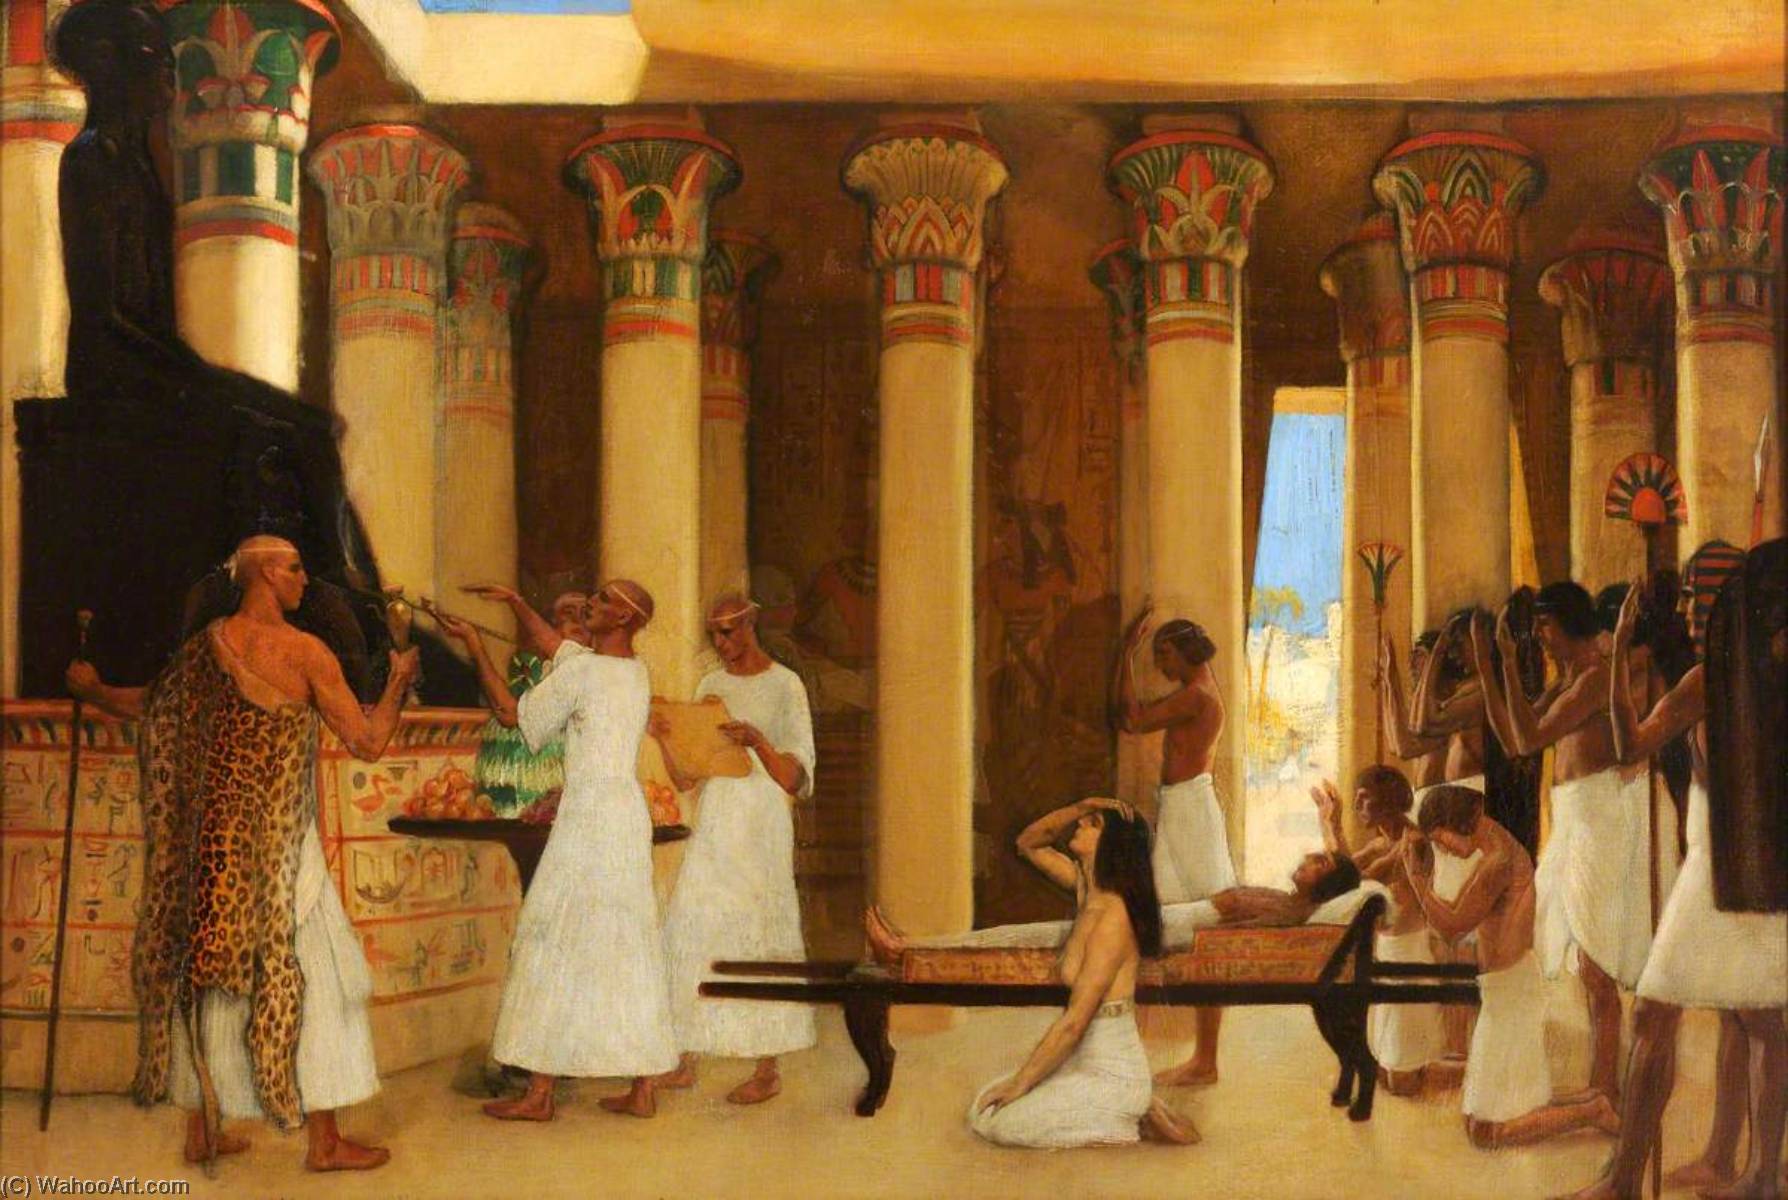 Order Oil Painting Replica An Invocation to I em hetep, the Egyptian Deity of Medicine by Ernest Board (1877-1934) | ArtsDot.com